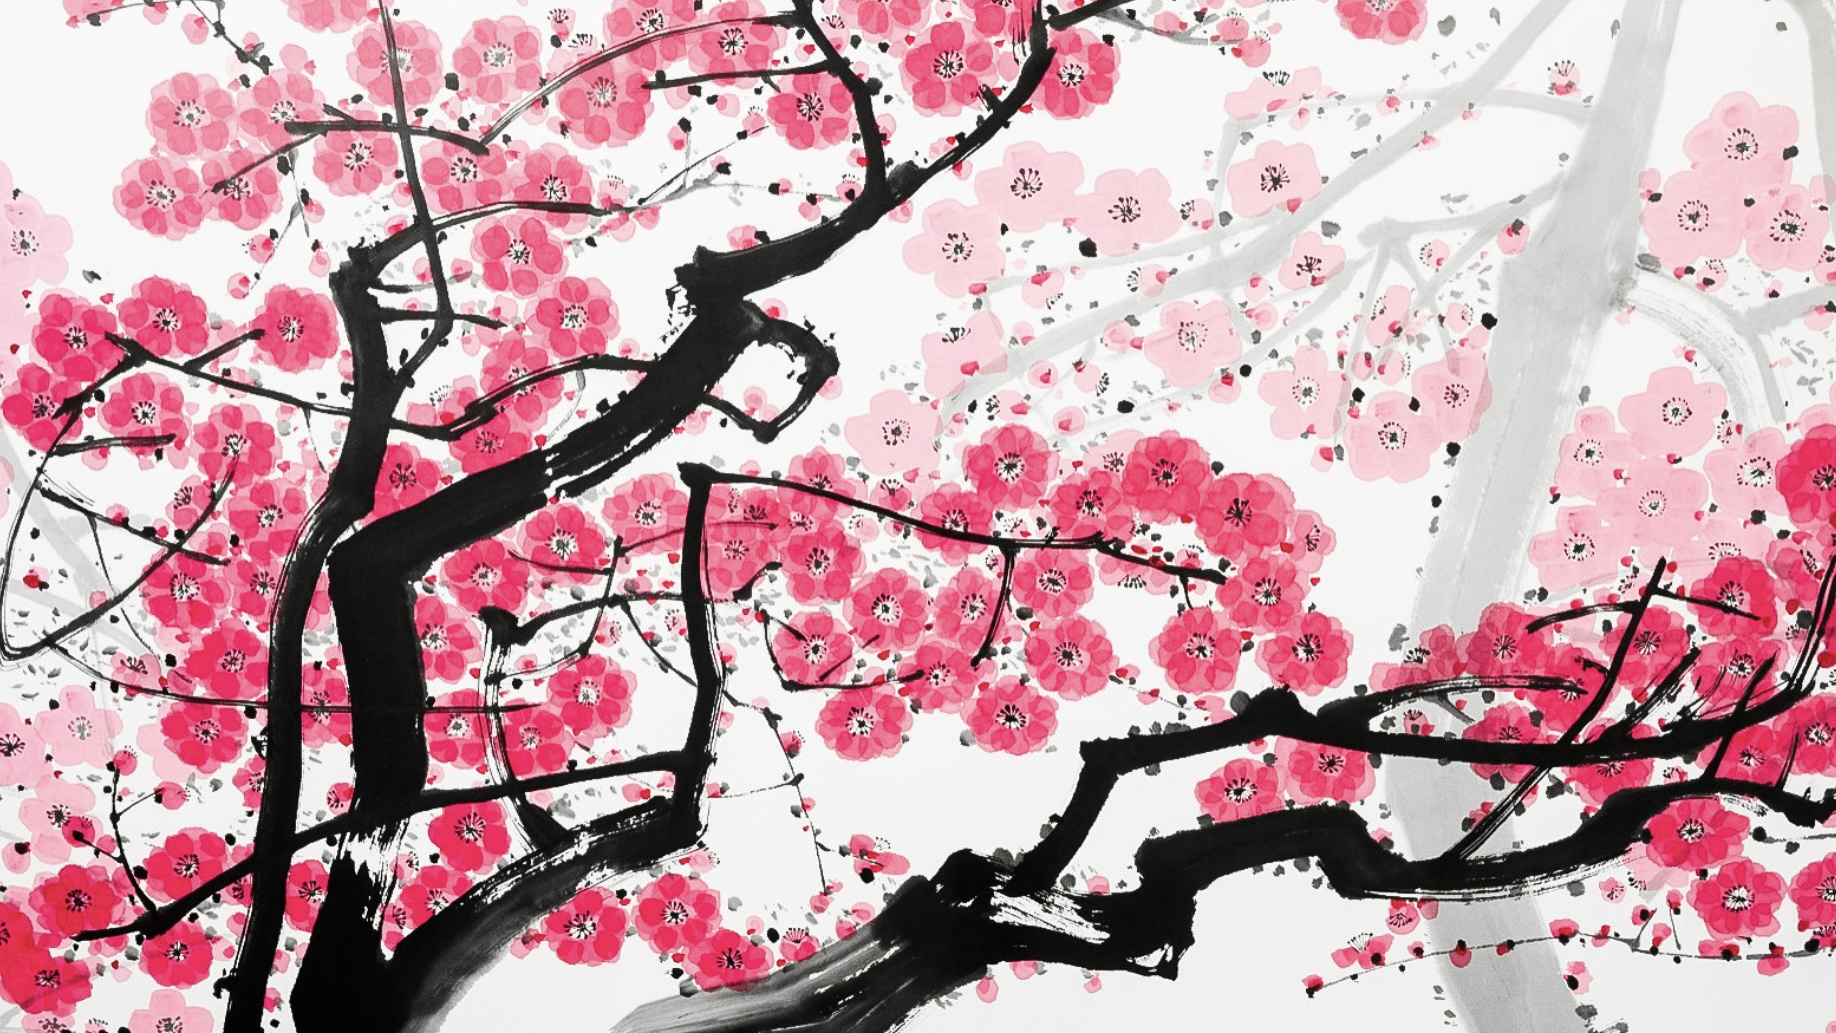 Chinese artist's plum blossom paintings leave strong aftertaste